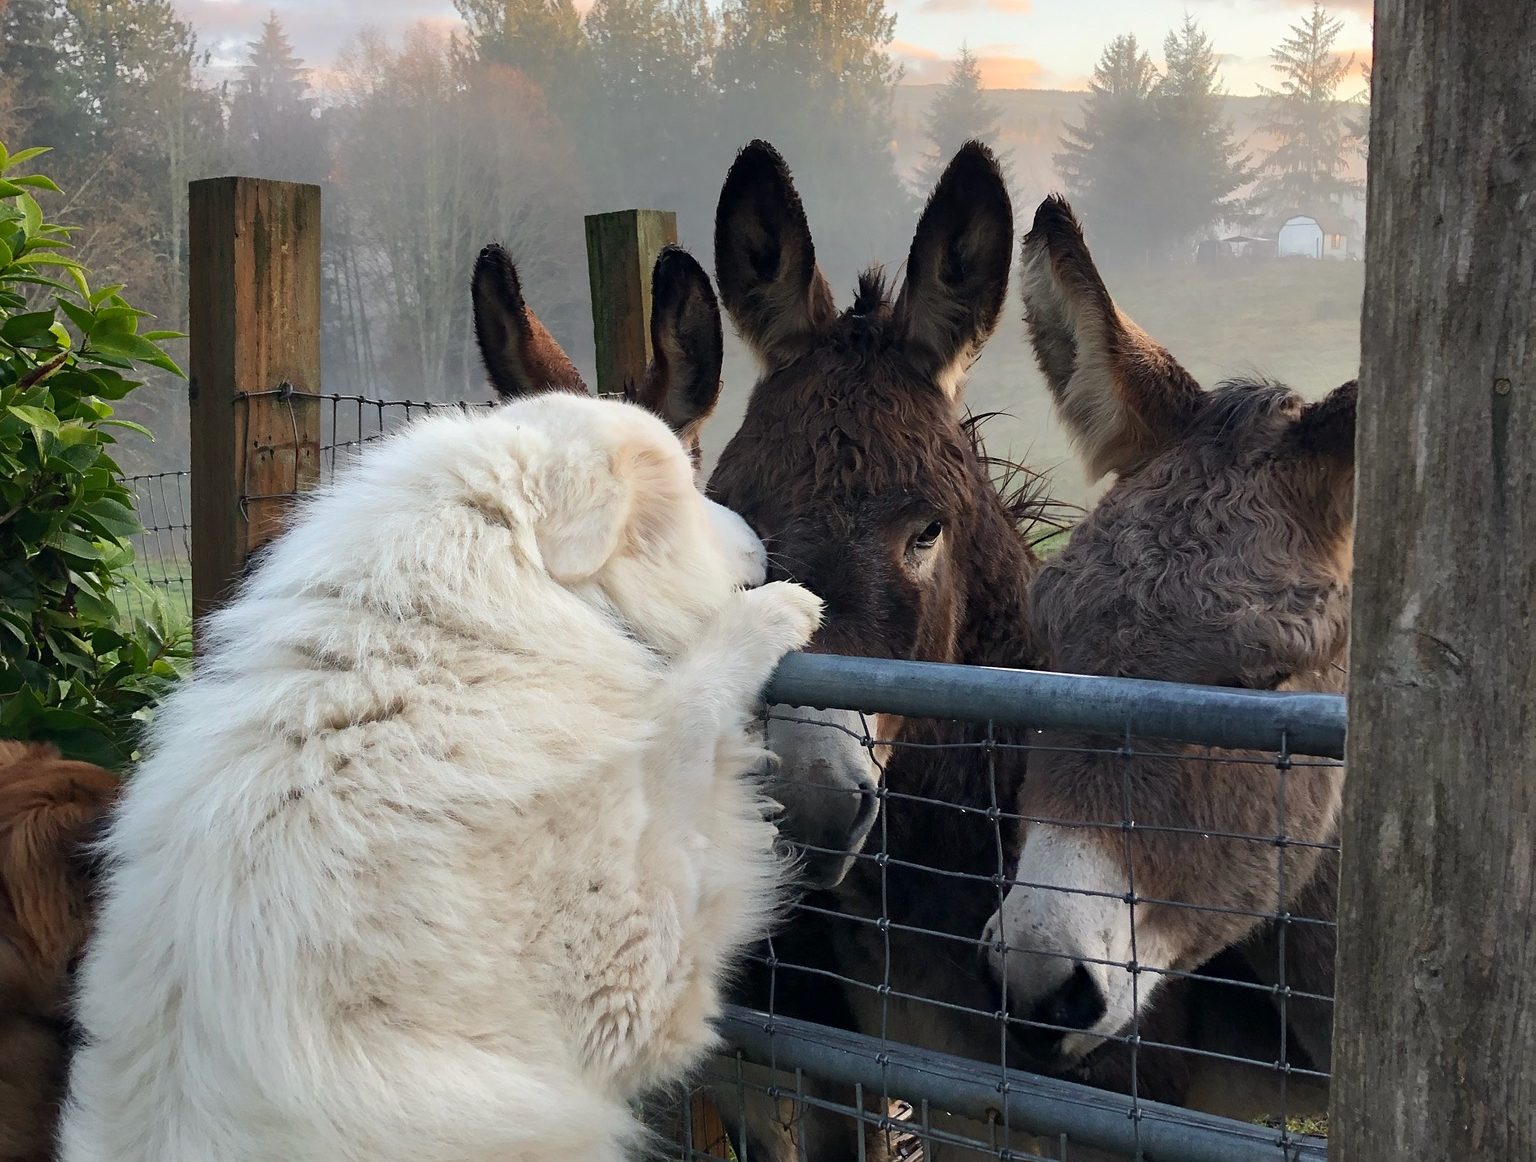 Dog and Donkeys nose to nose